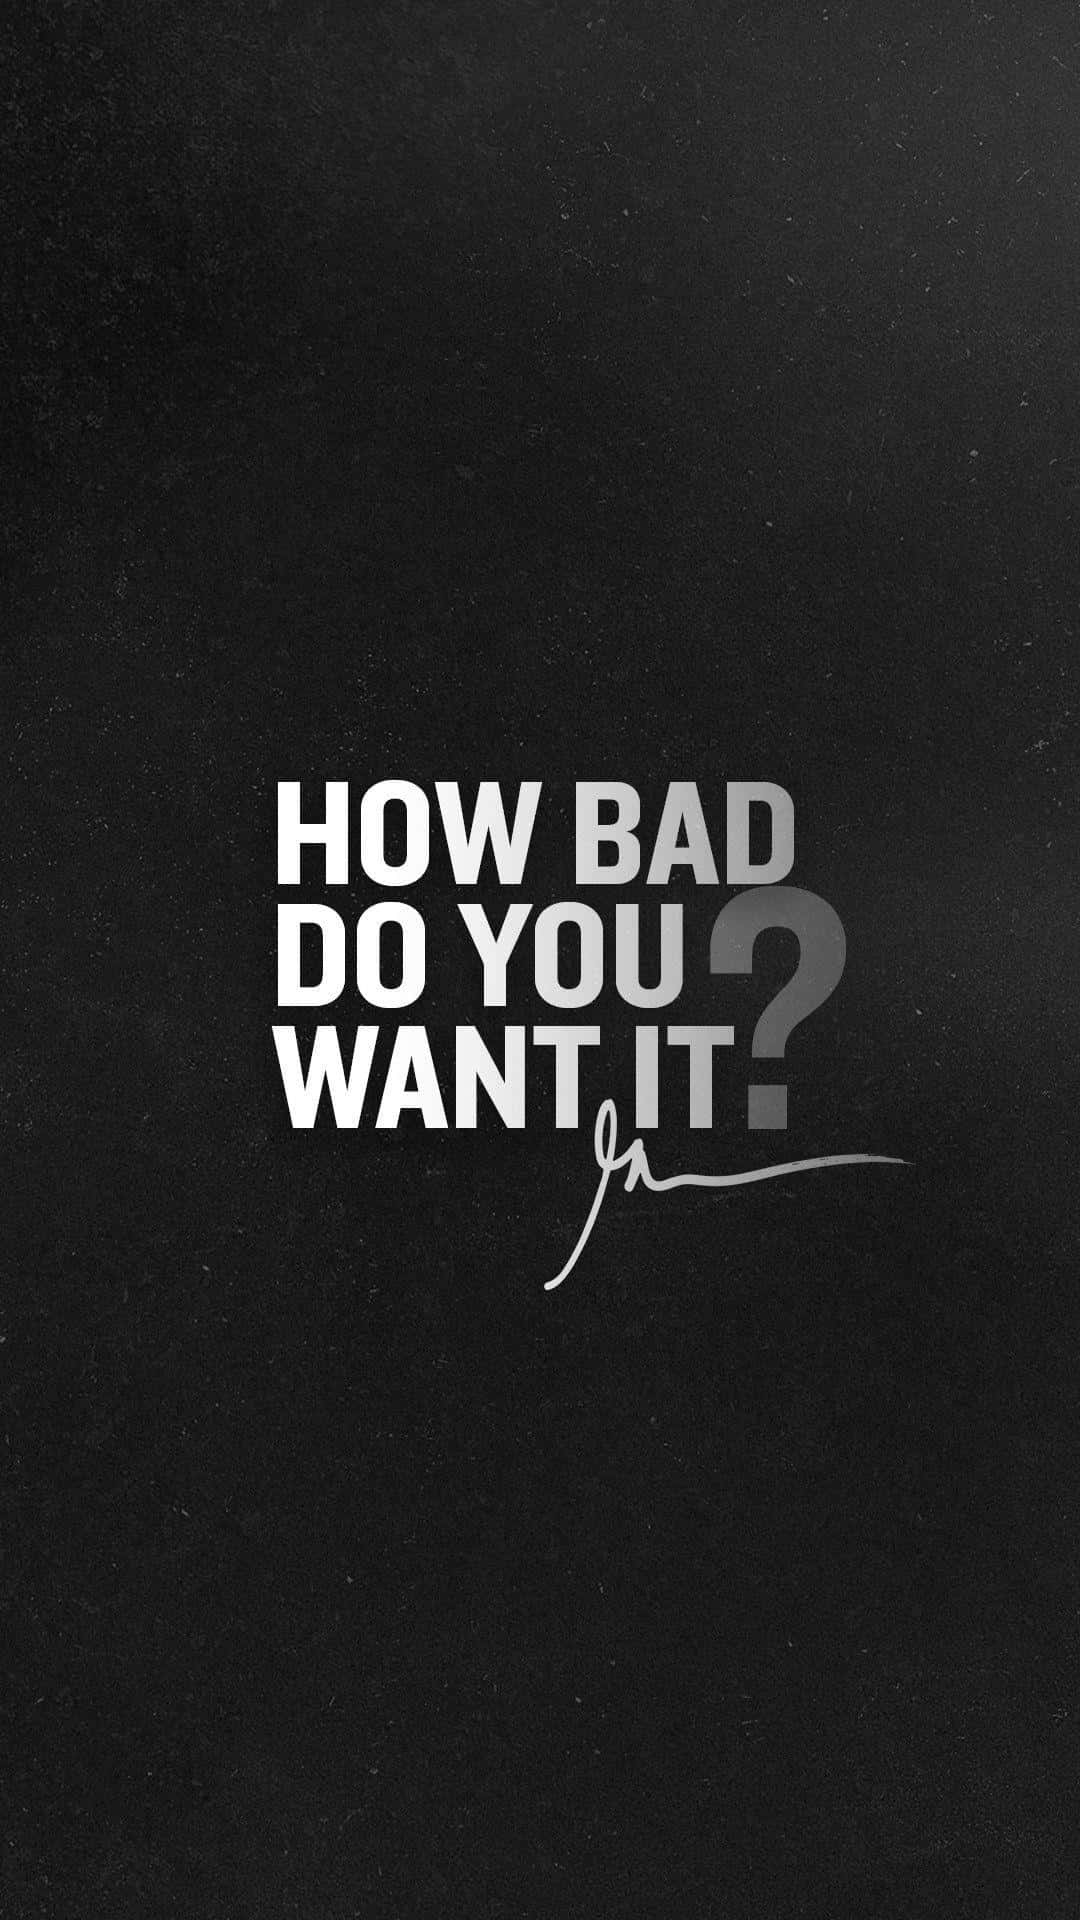 How Bad Do You Want It?